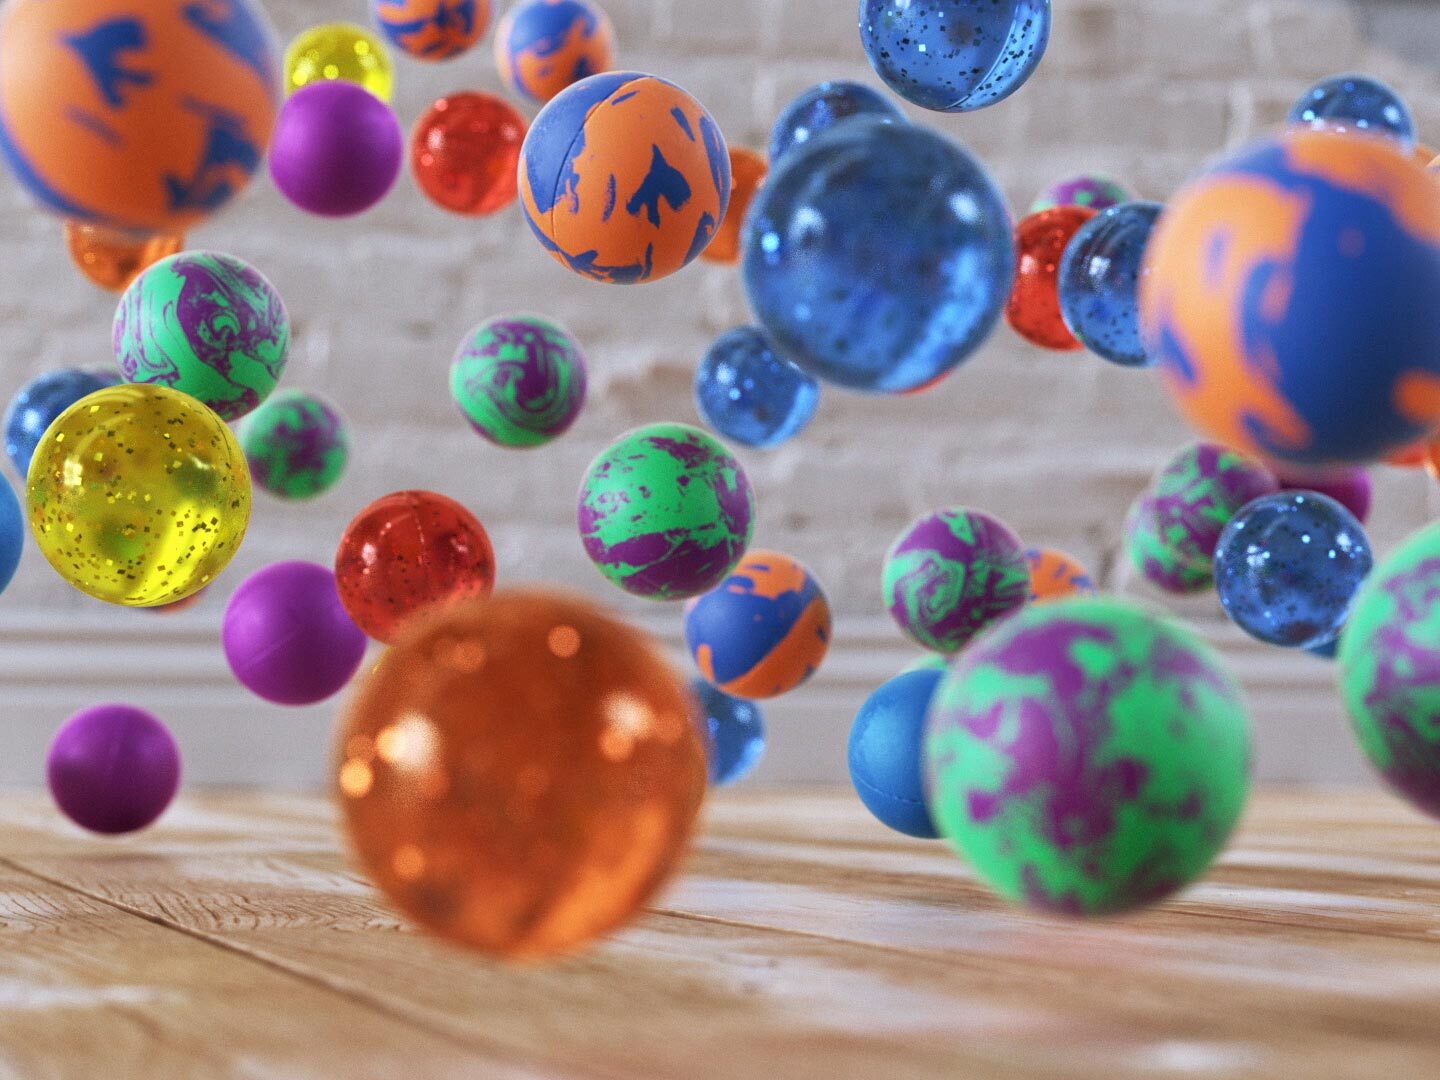 Clean shot of BBC Brit Ident bouncy ball graphics in mid-air